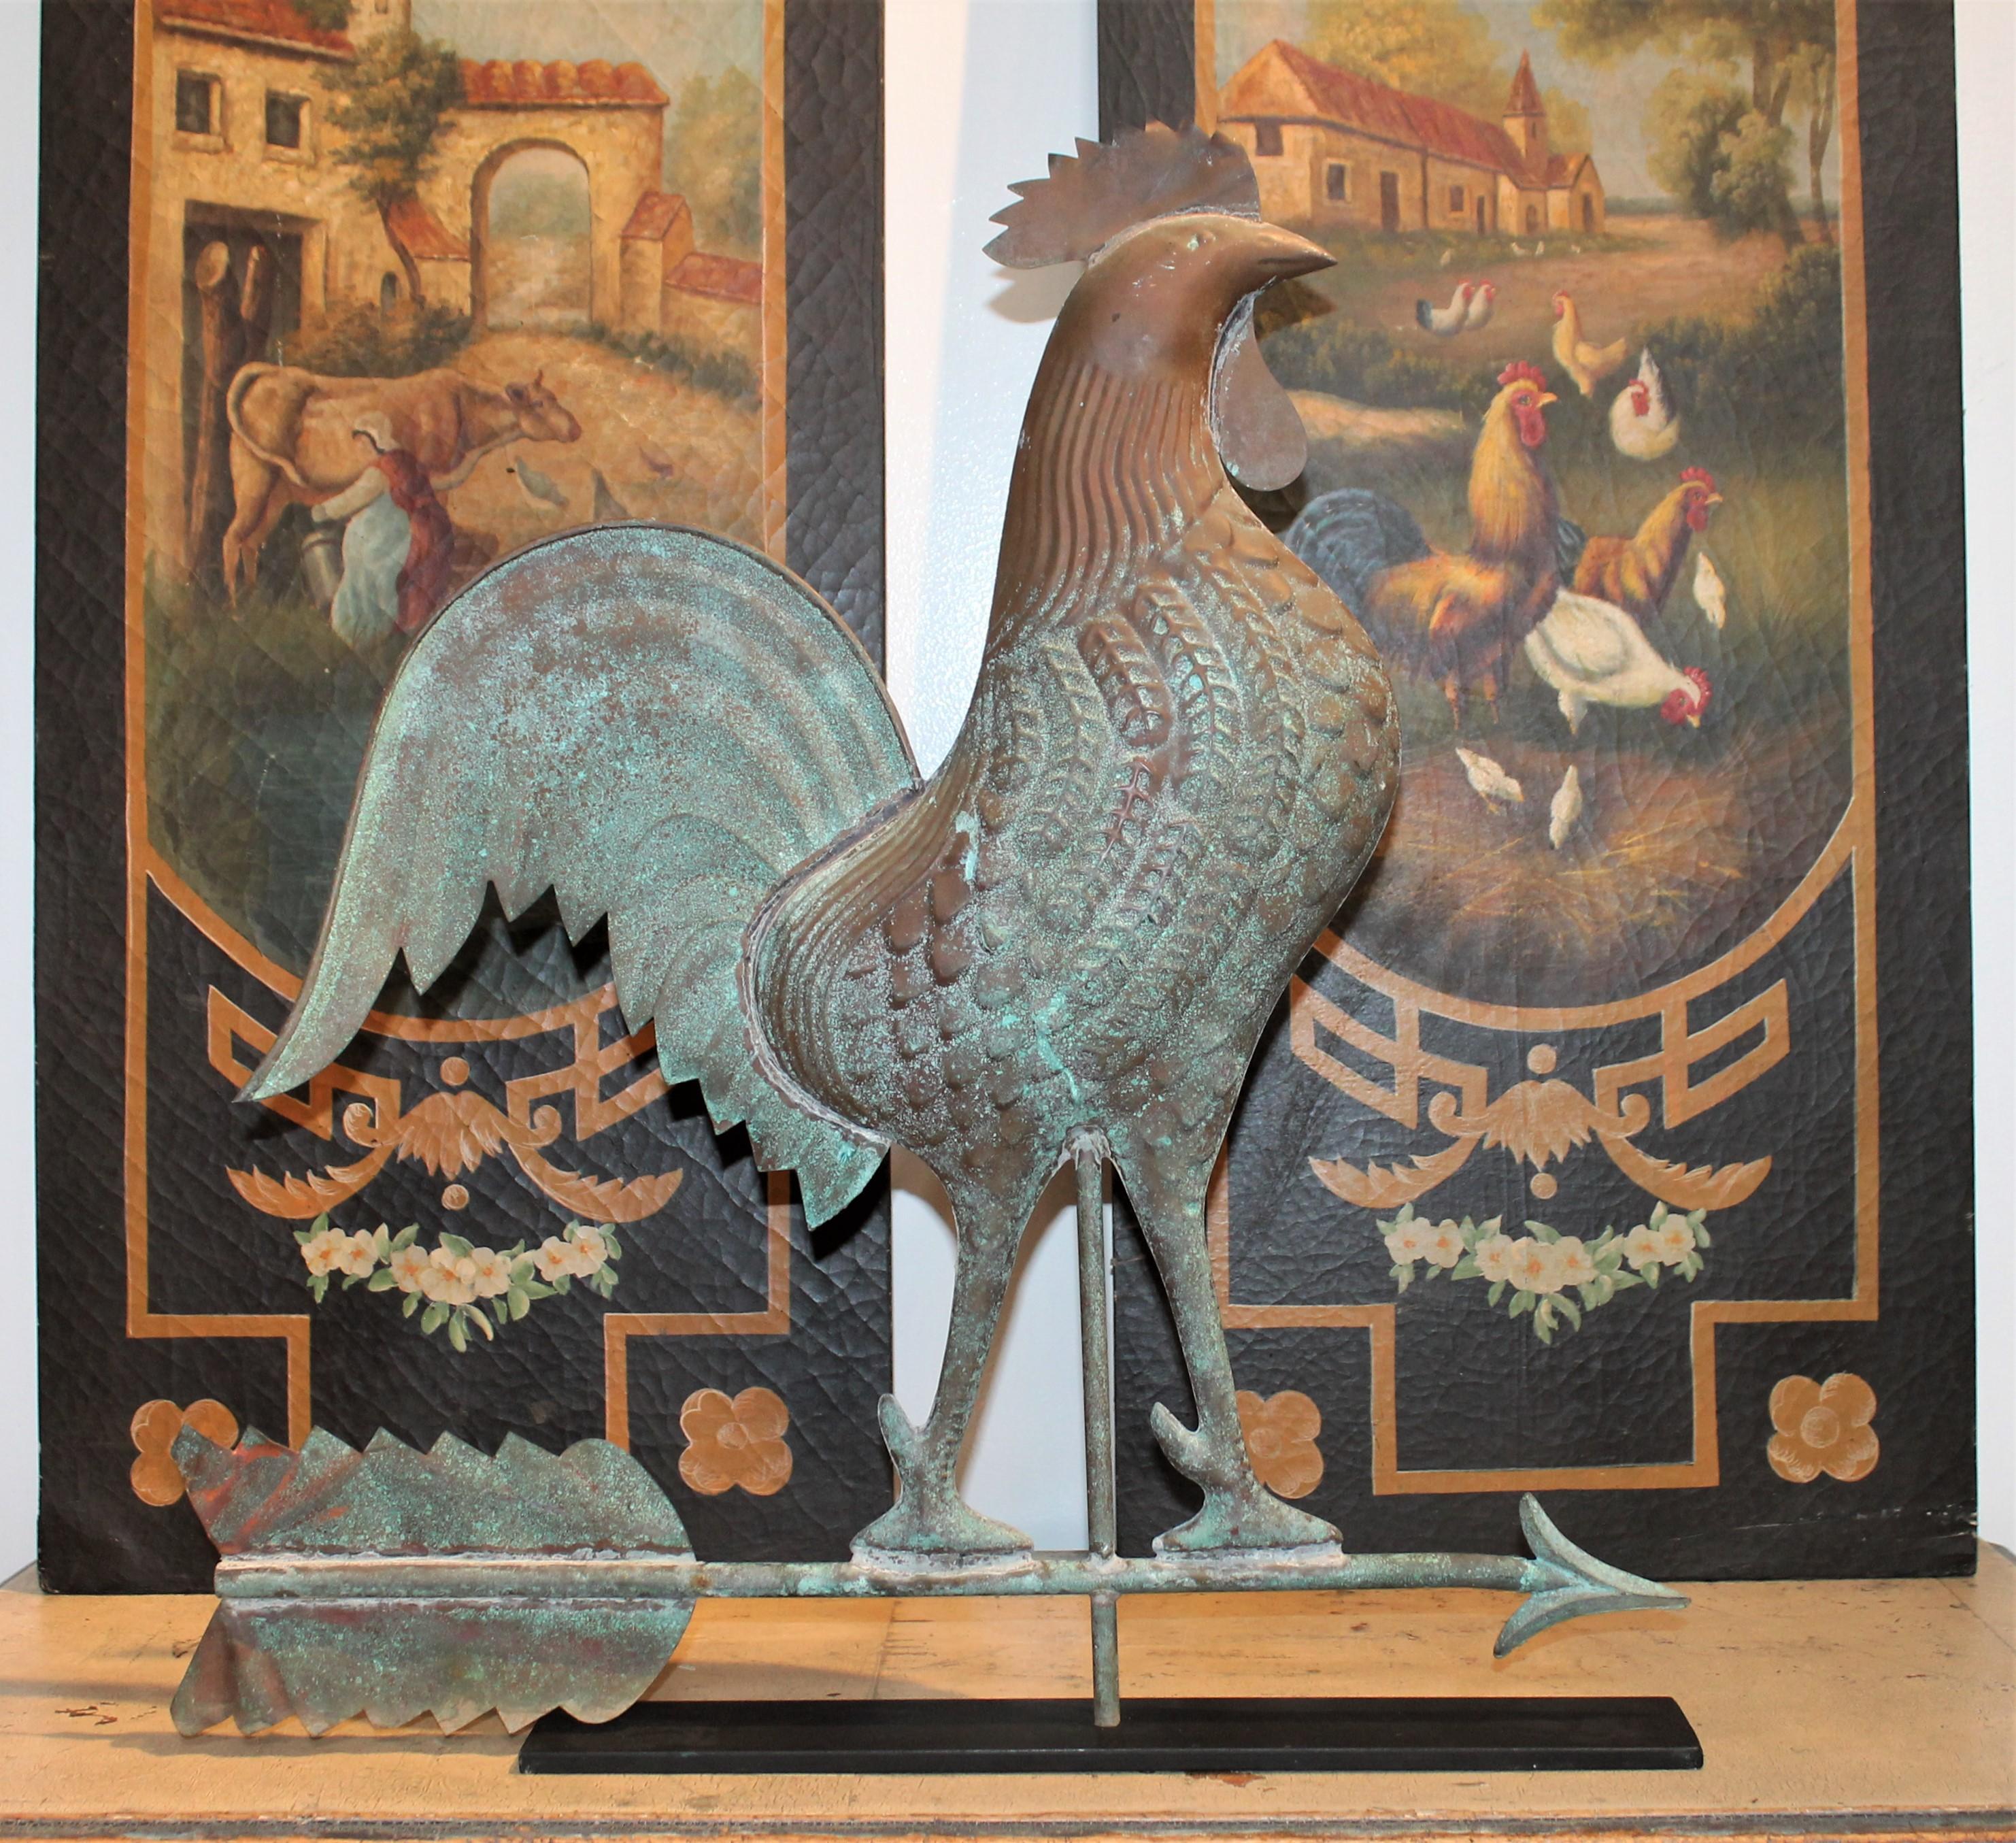 This fine copper rooster weather vane has a wonderful undisturbed surface and wear. There are minor dents or marks on the tail feathers of the arrow. No bullet holes or other dents. This late but great copper cock has a fantastic presents. The iron